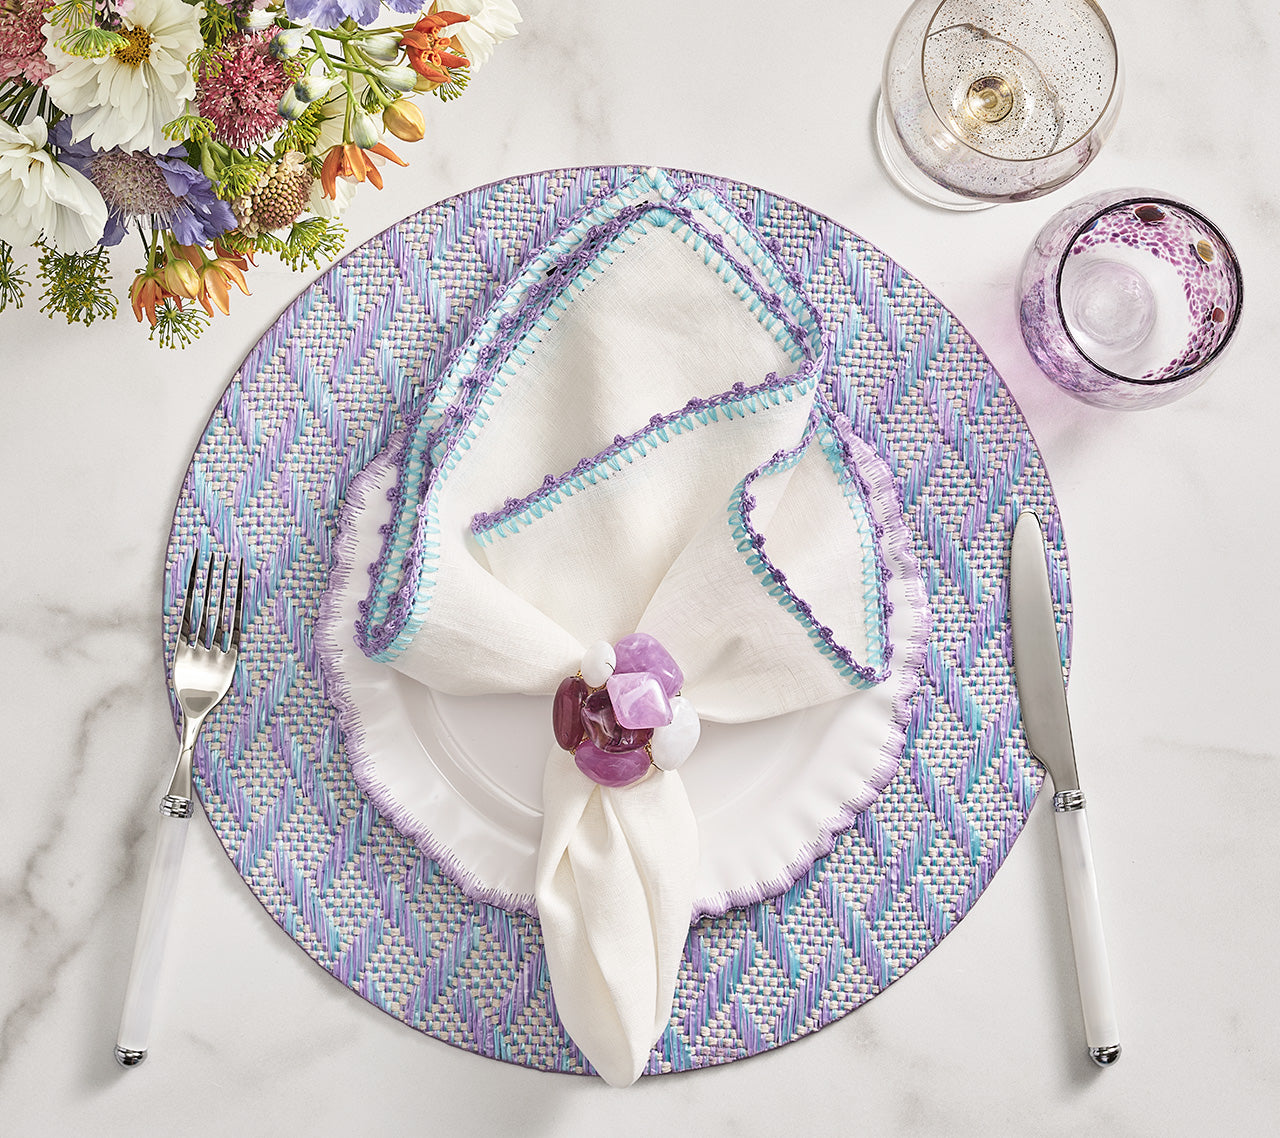 Knotted Edge Napkin in White, Lilac & Blue, Set of 4